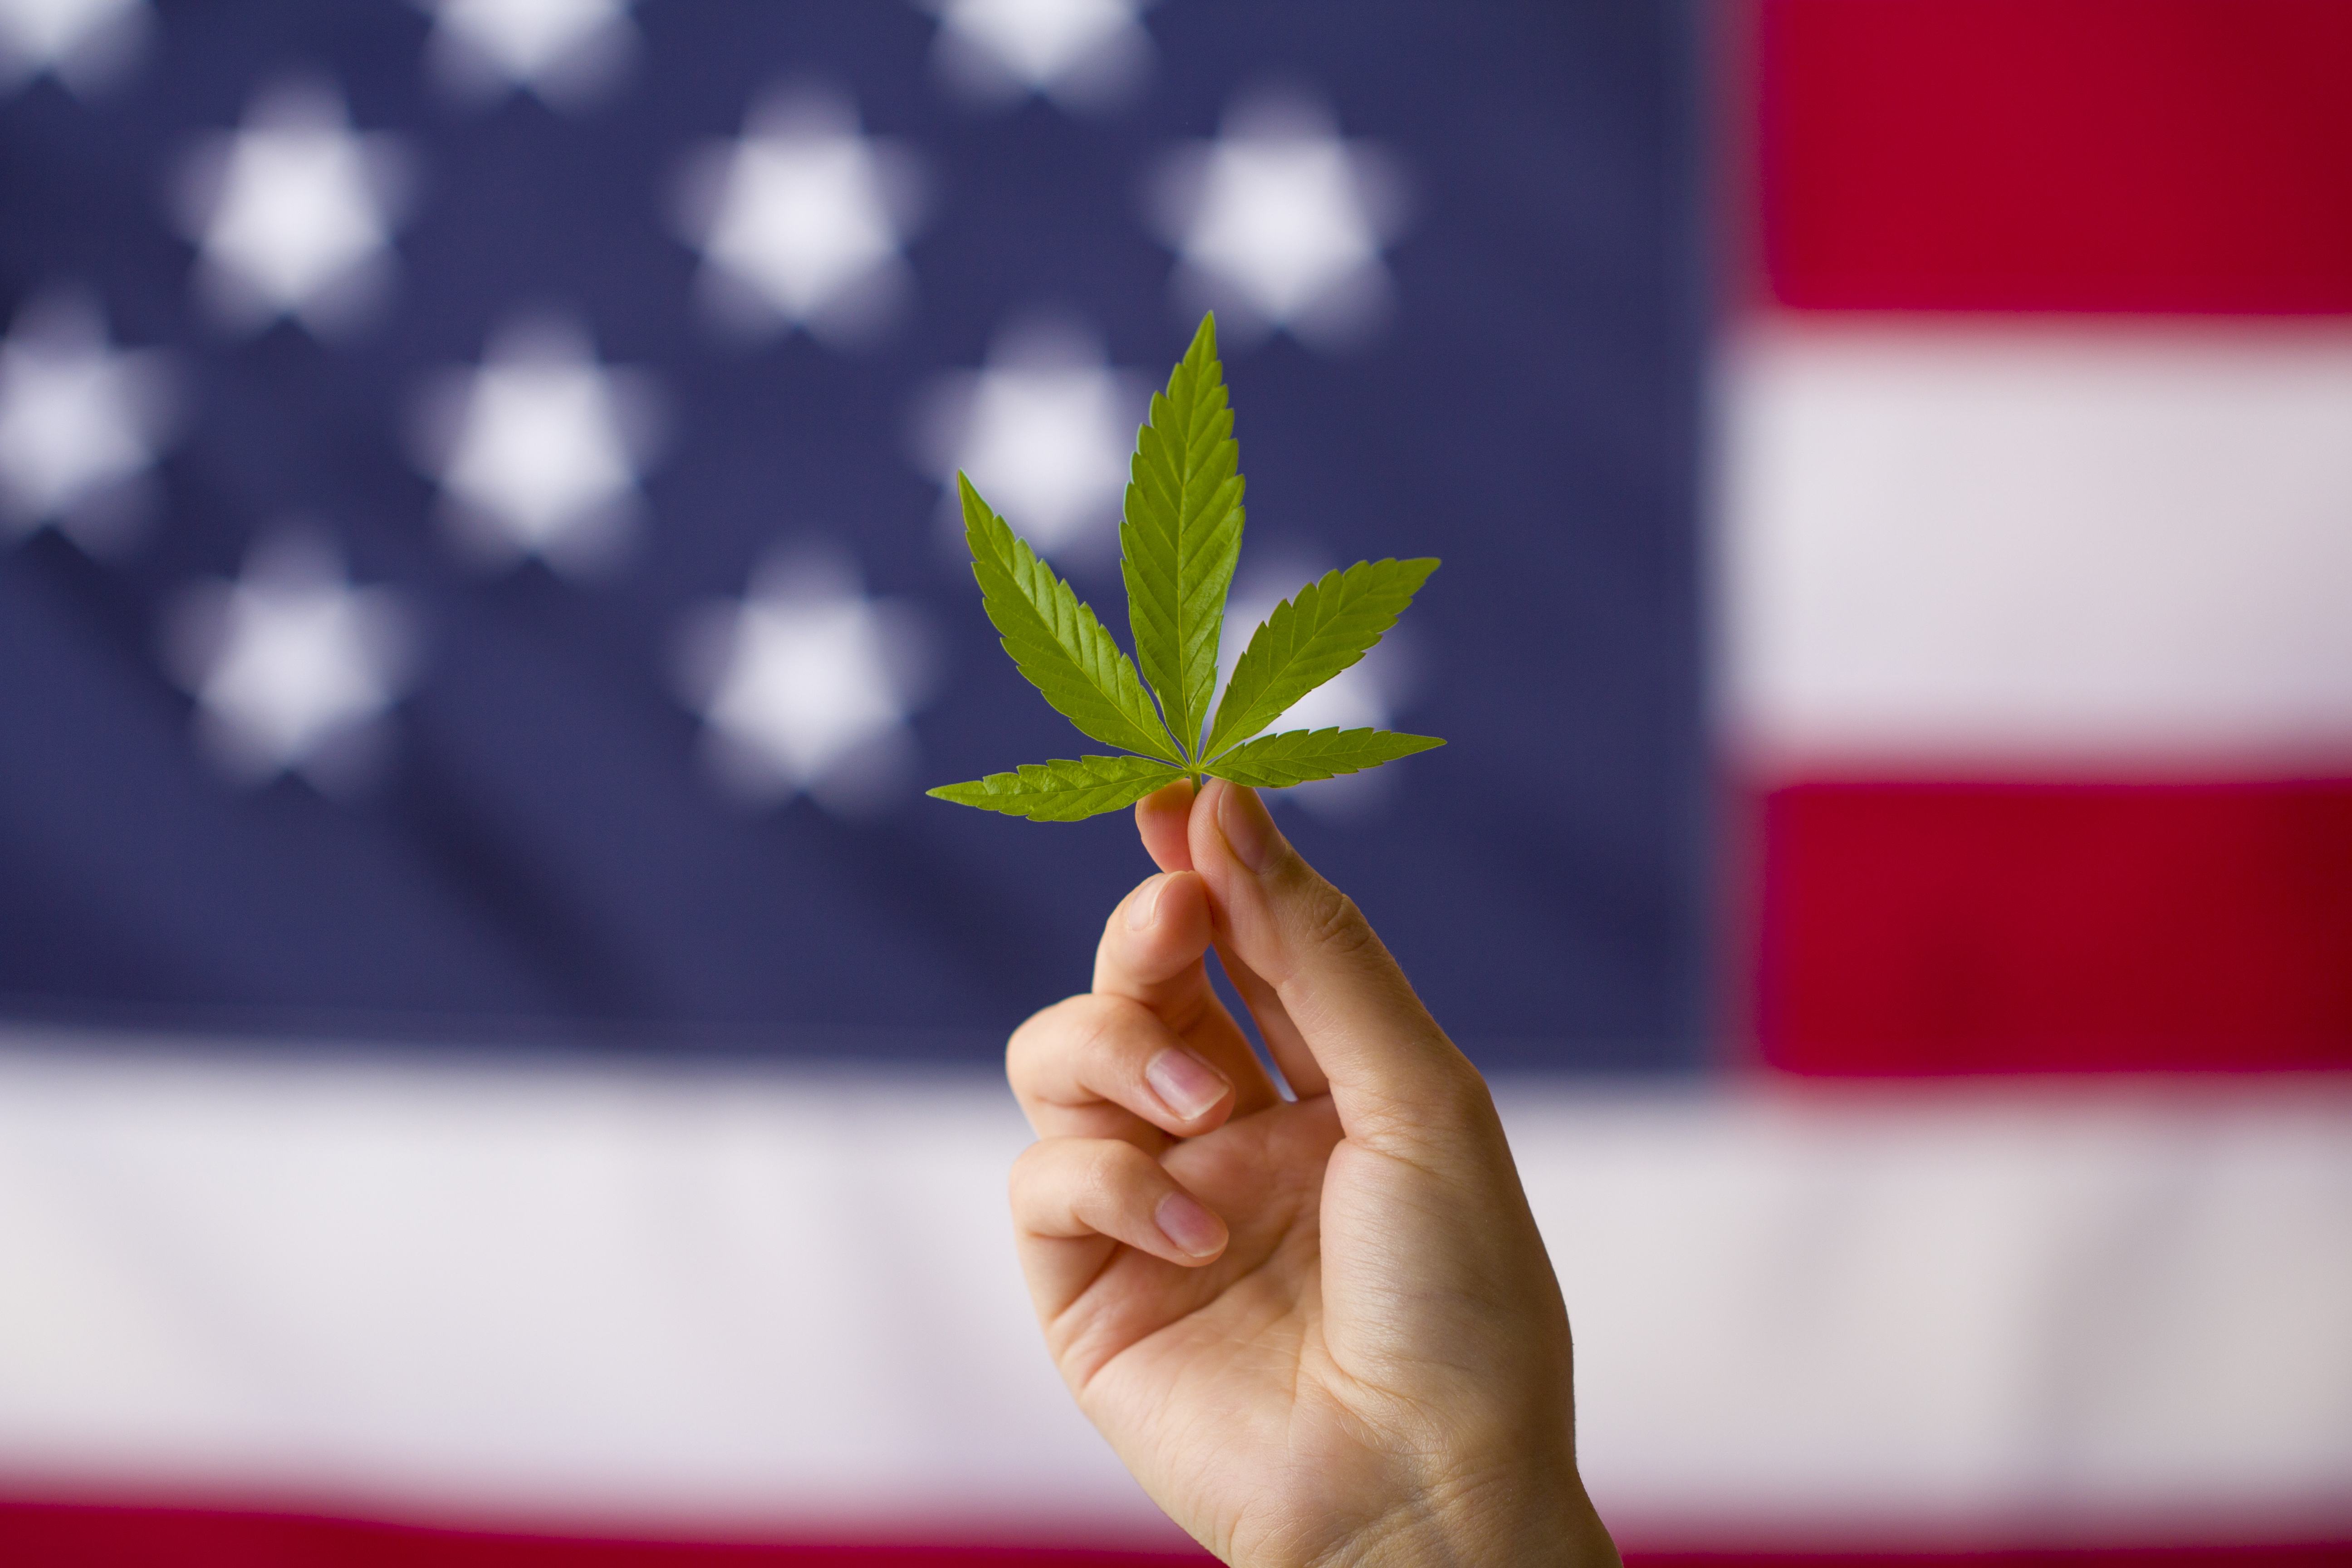 Five States that may go Legal in 2023